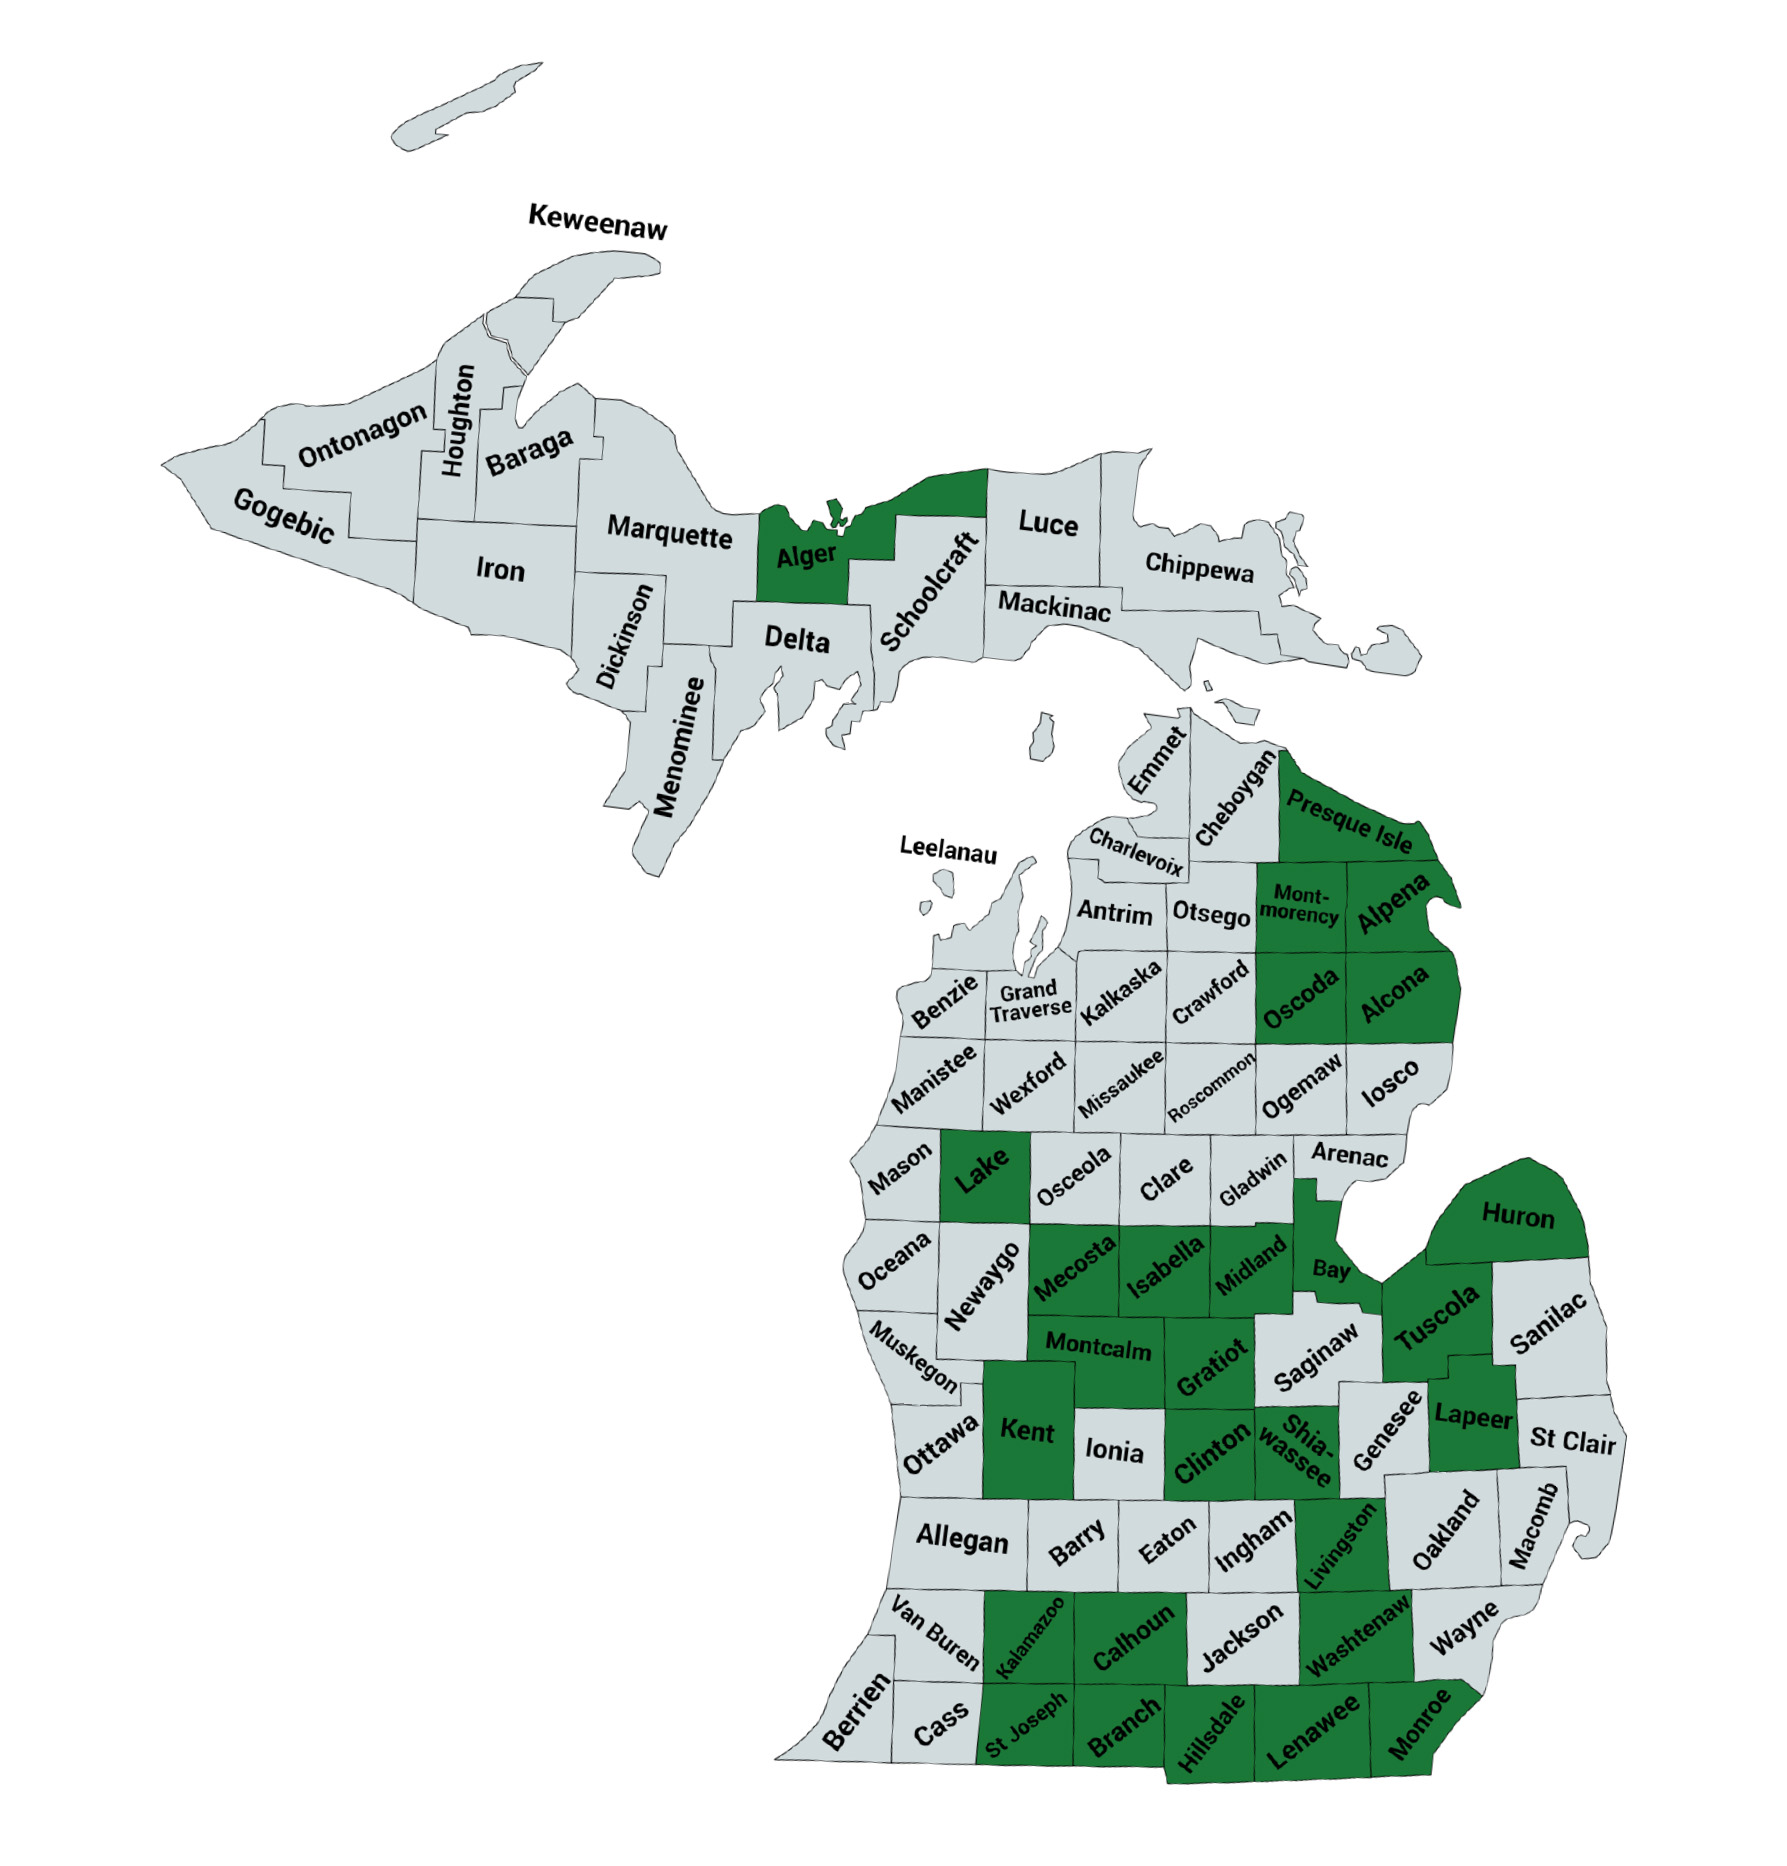 A map of Michigan showing the counties where soil samples were taken.